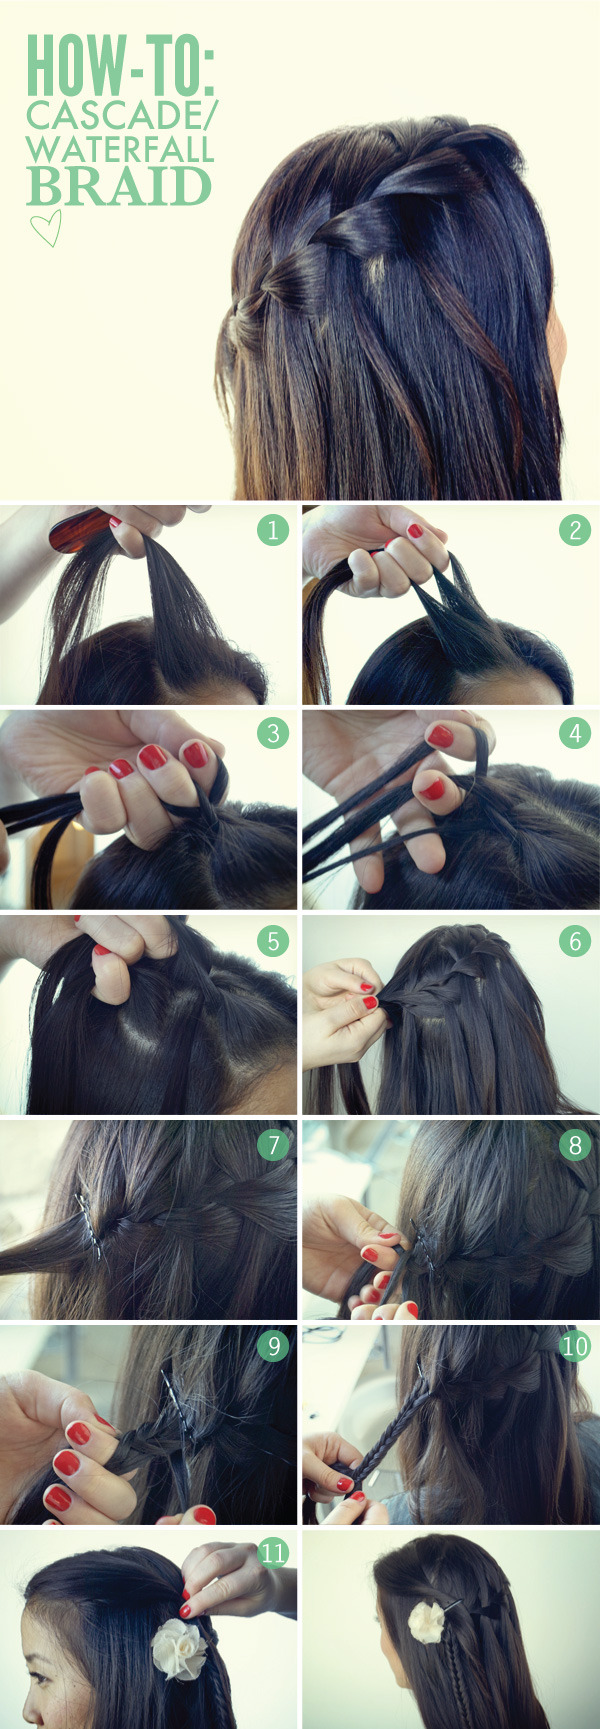 How To Do a Waterfall Braid 